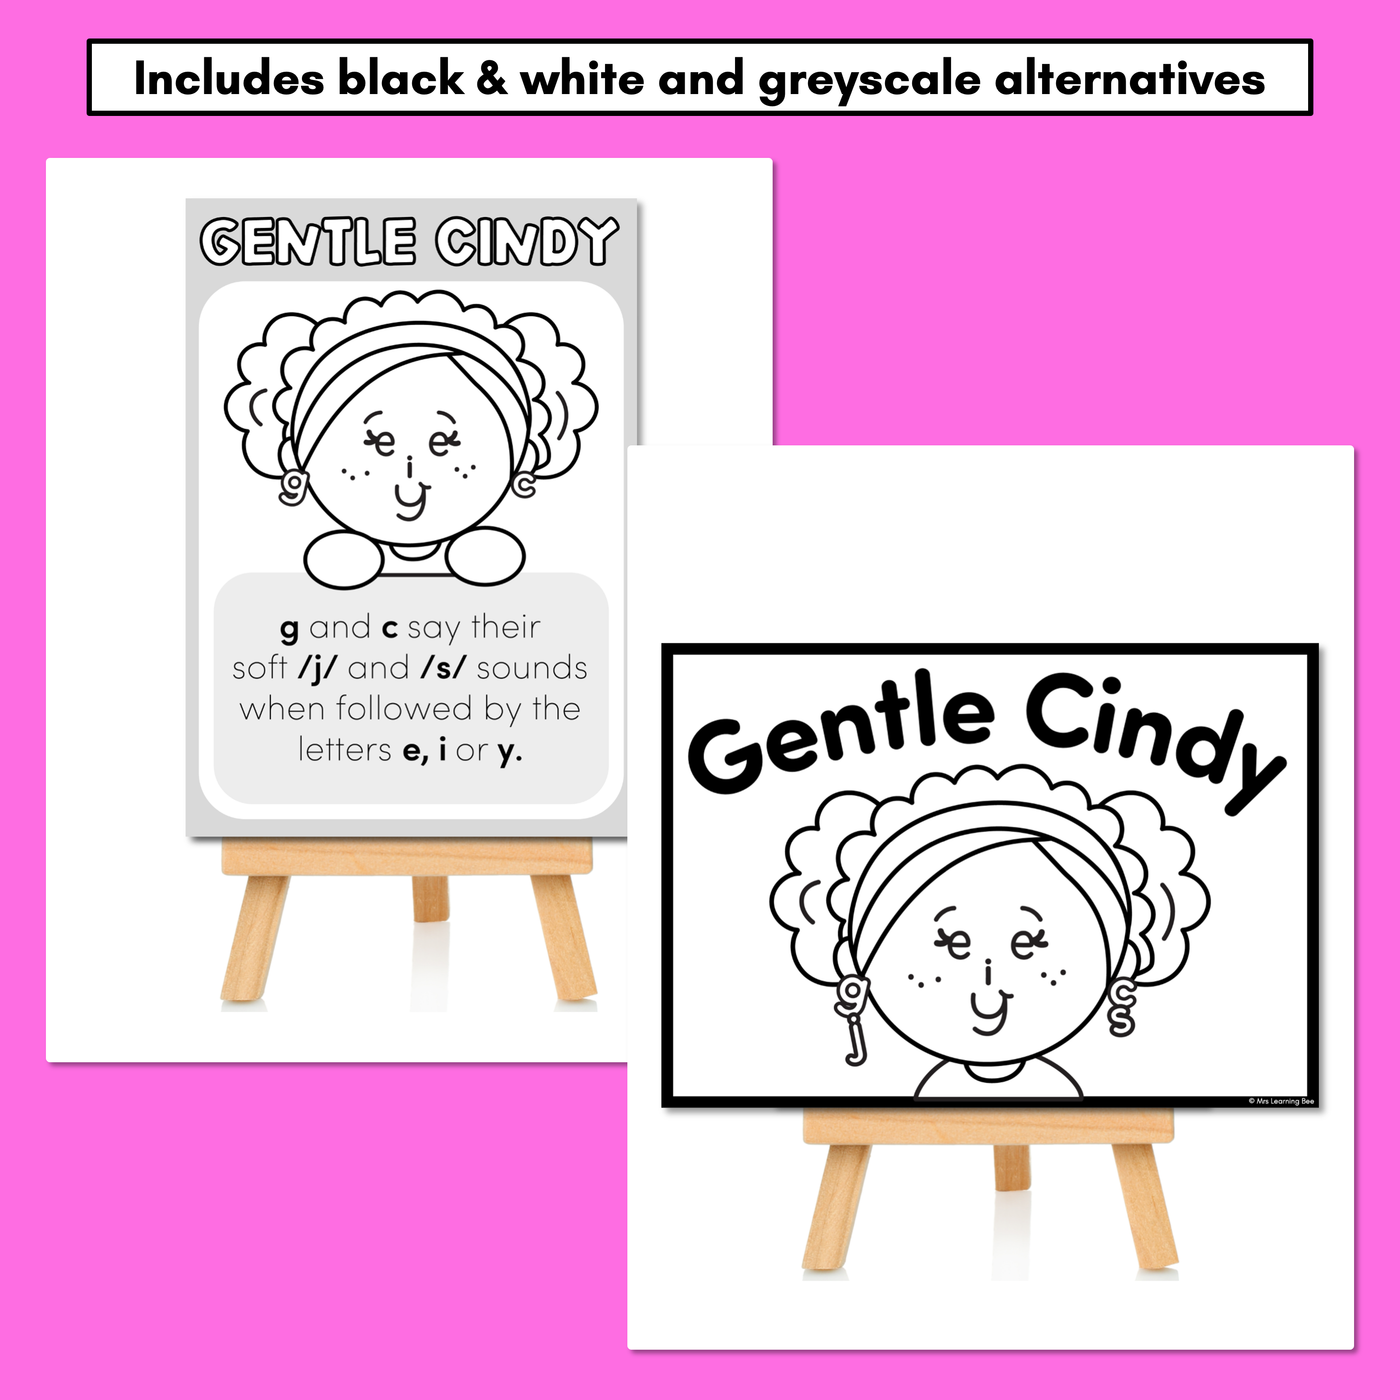 GENTLE CINDY - Posters & Displays for Soft G and Soft C Spelling Rule - Spelling Generalisations